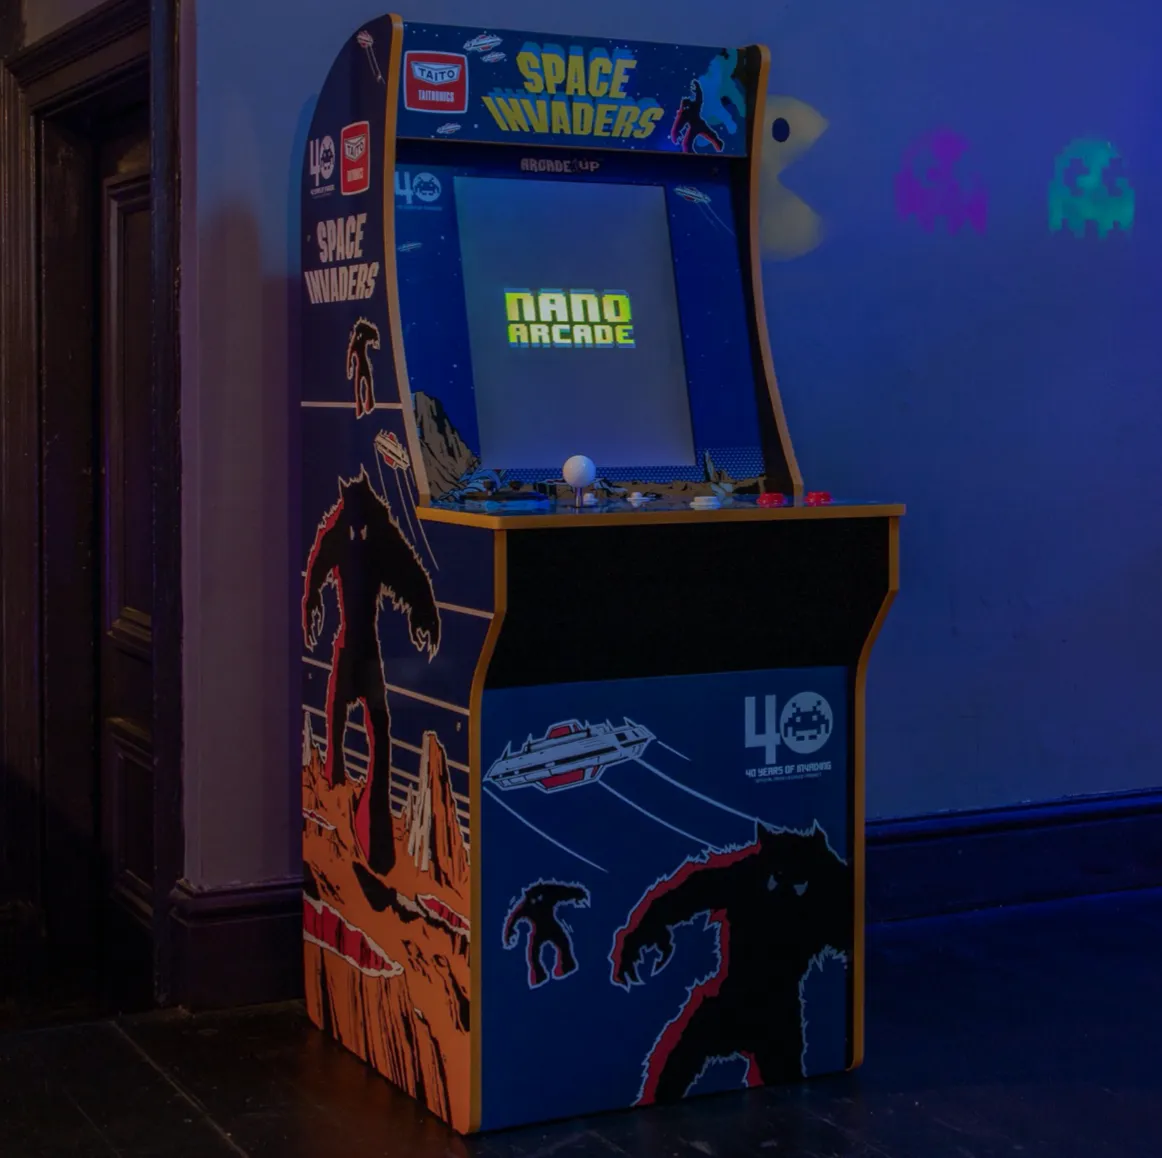 Space invaders machine